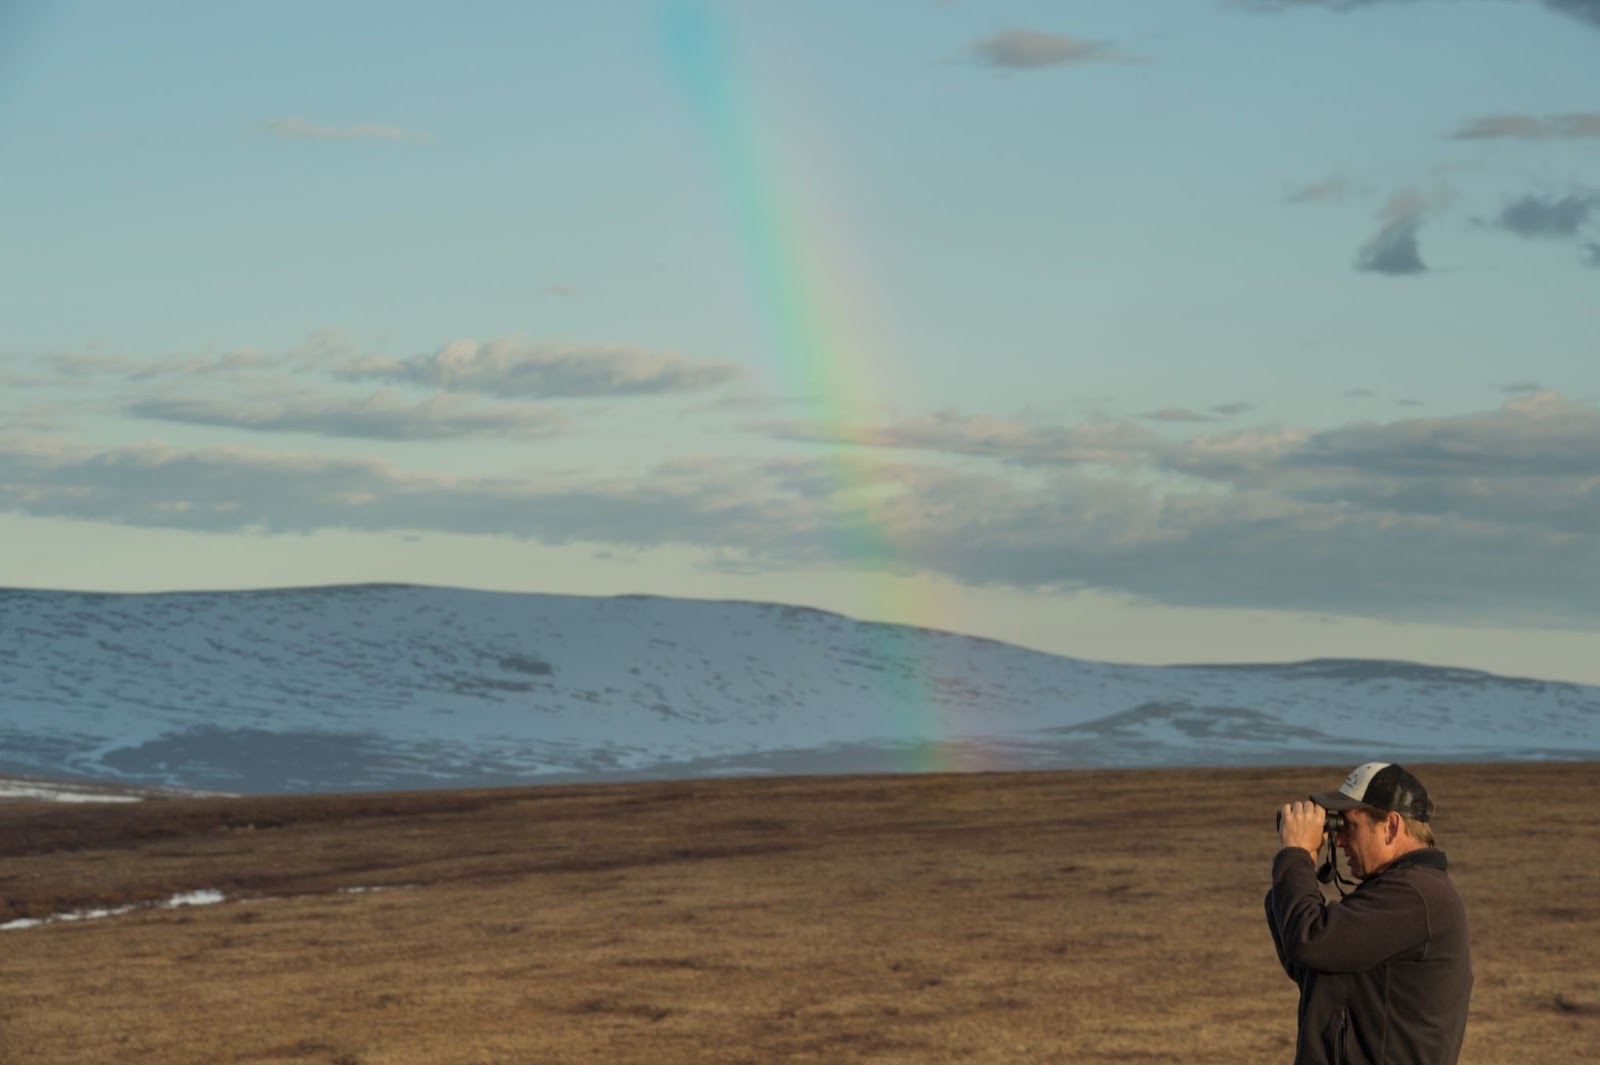 Pete Marra stands with binoculars with a rainbow in the background